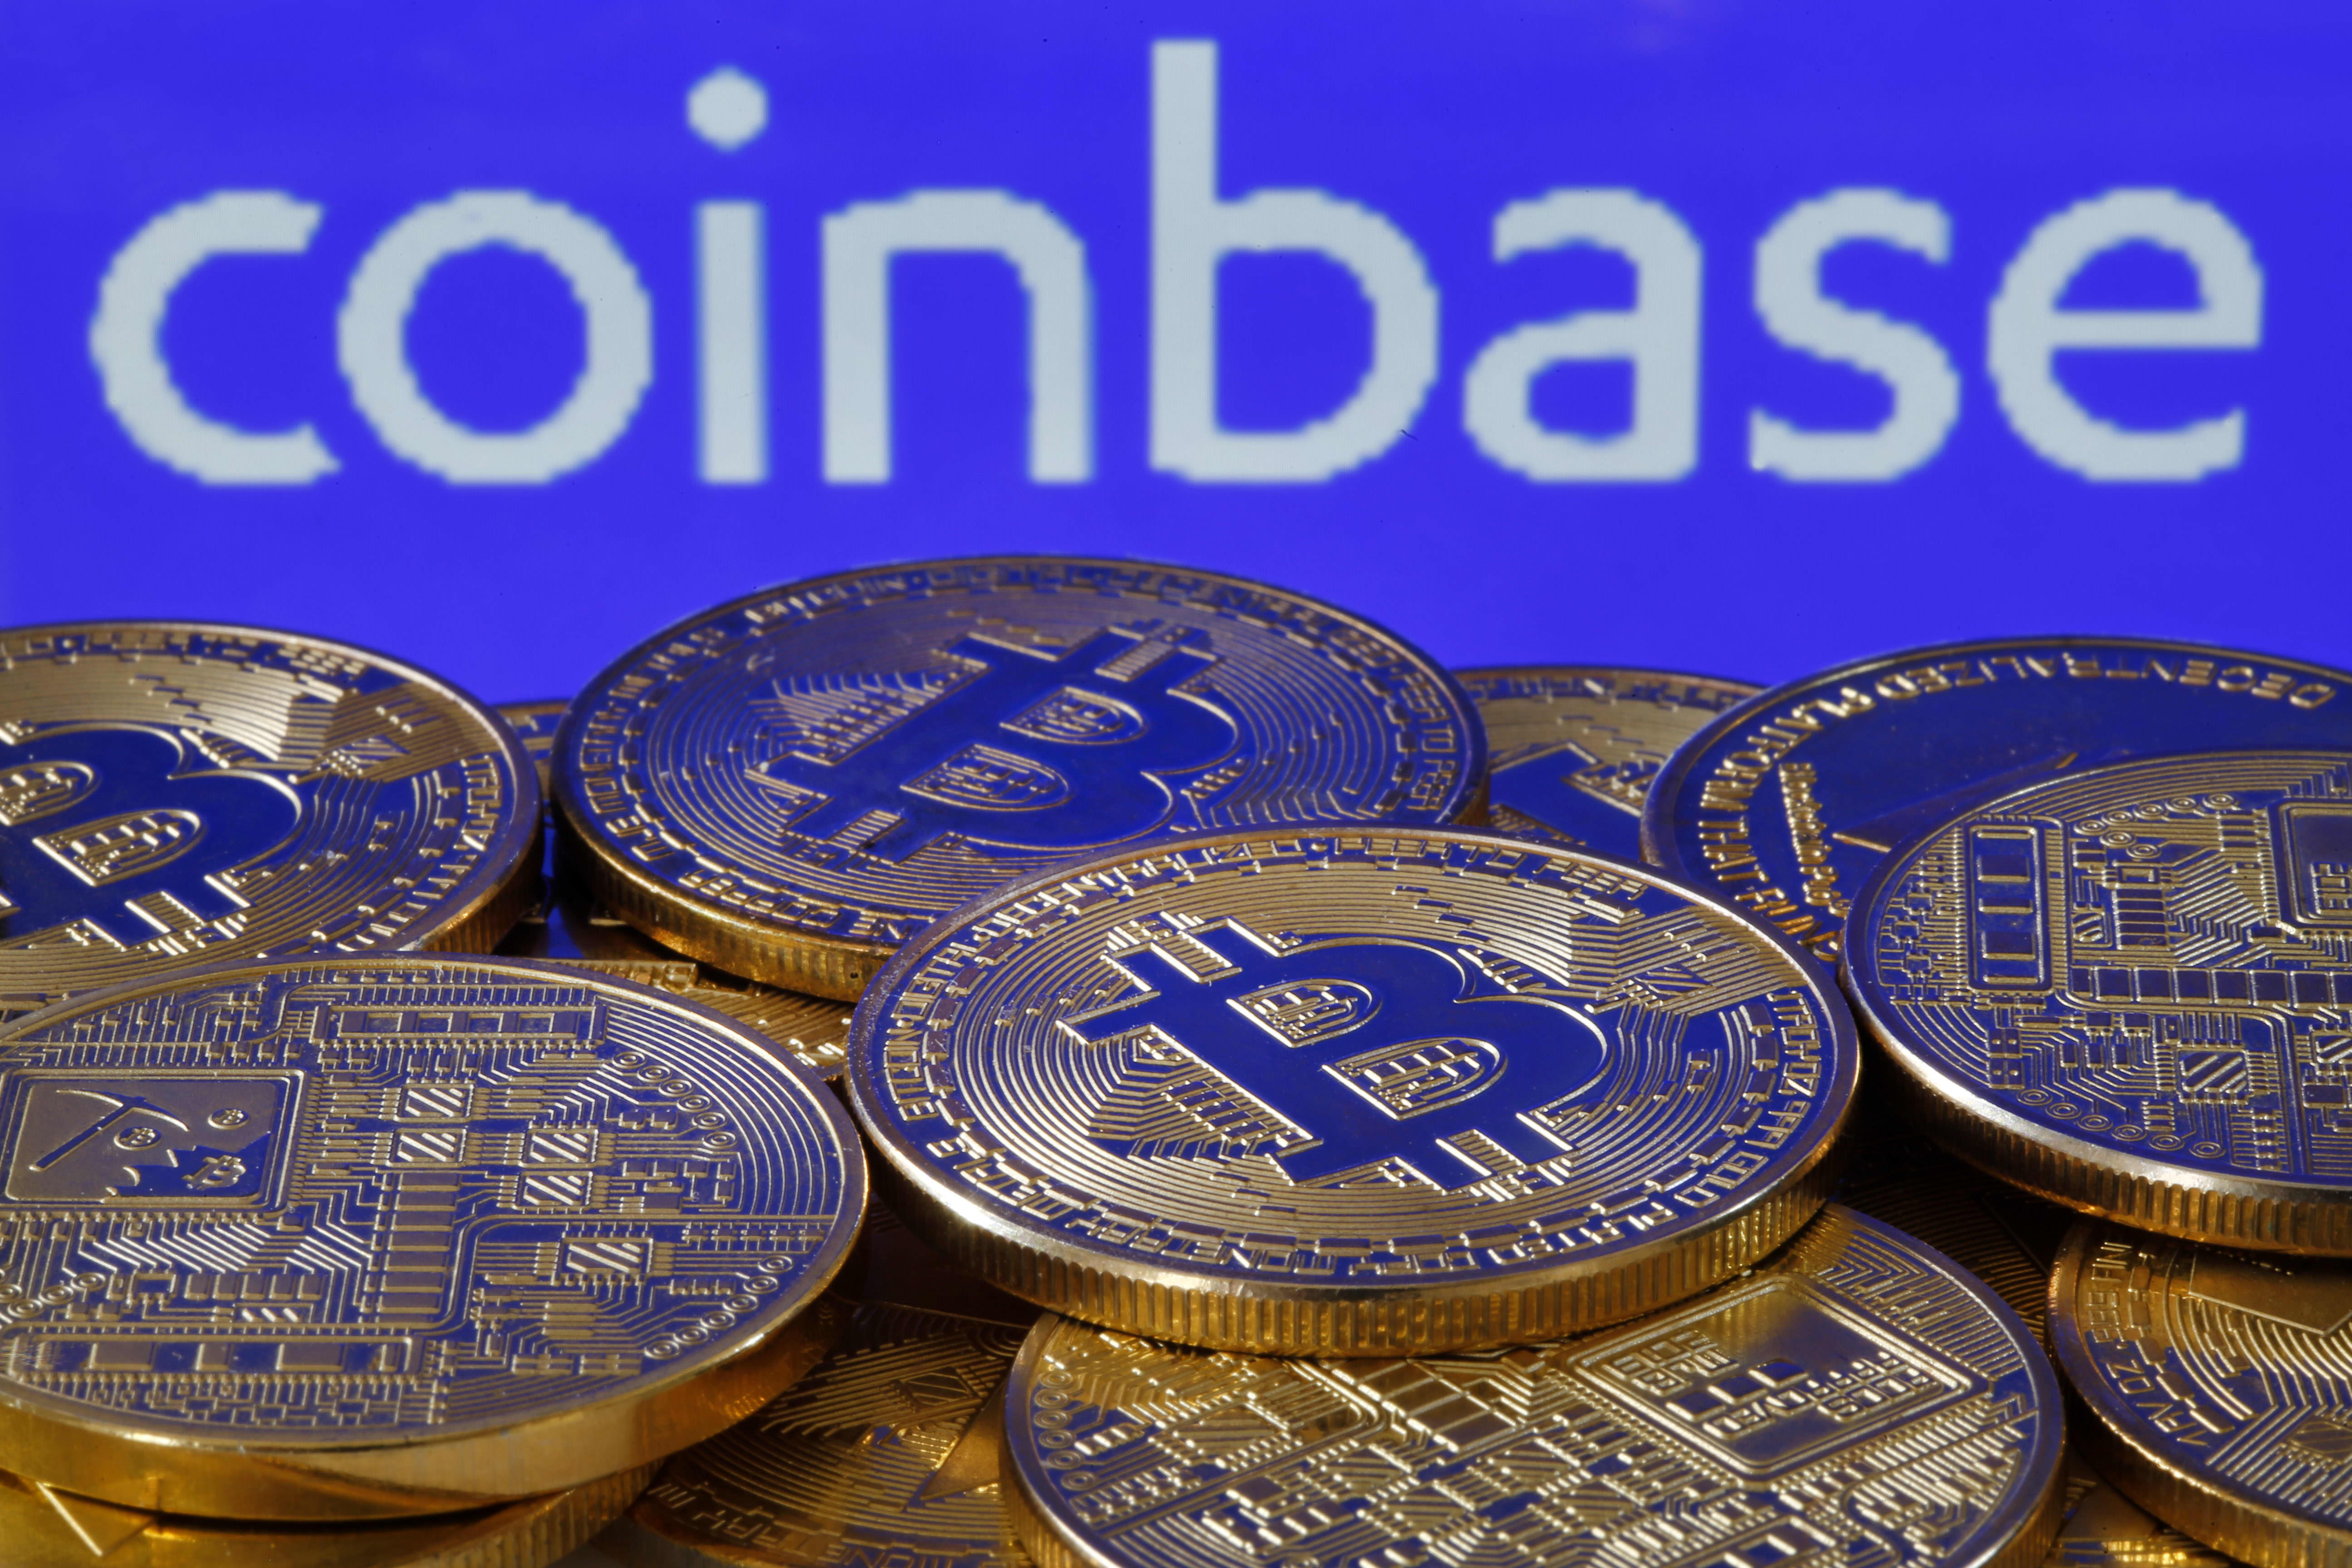 Mizuho downgrades Coinbase, says stock could fall 30% if deal key to revenue is renegotiated